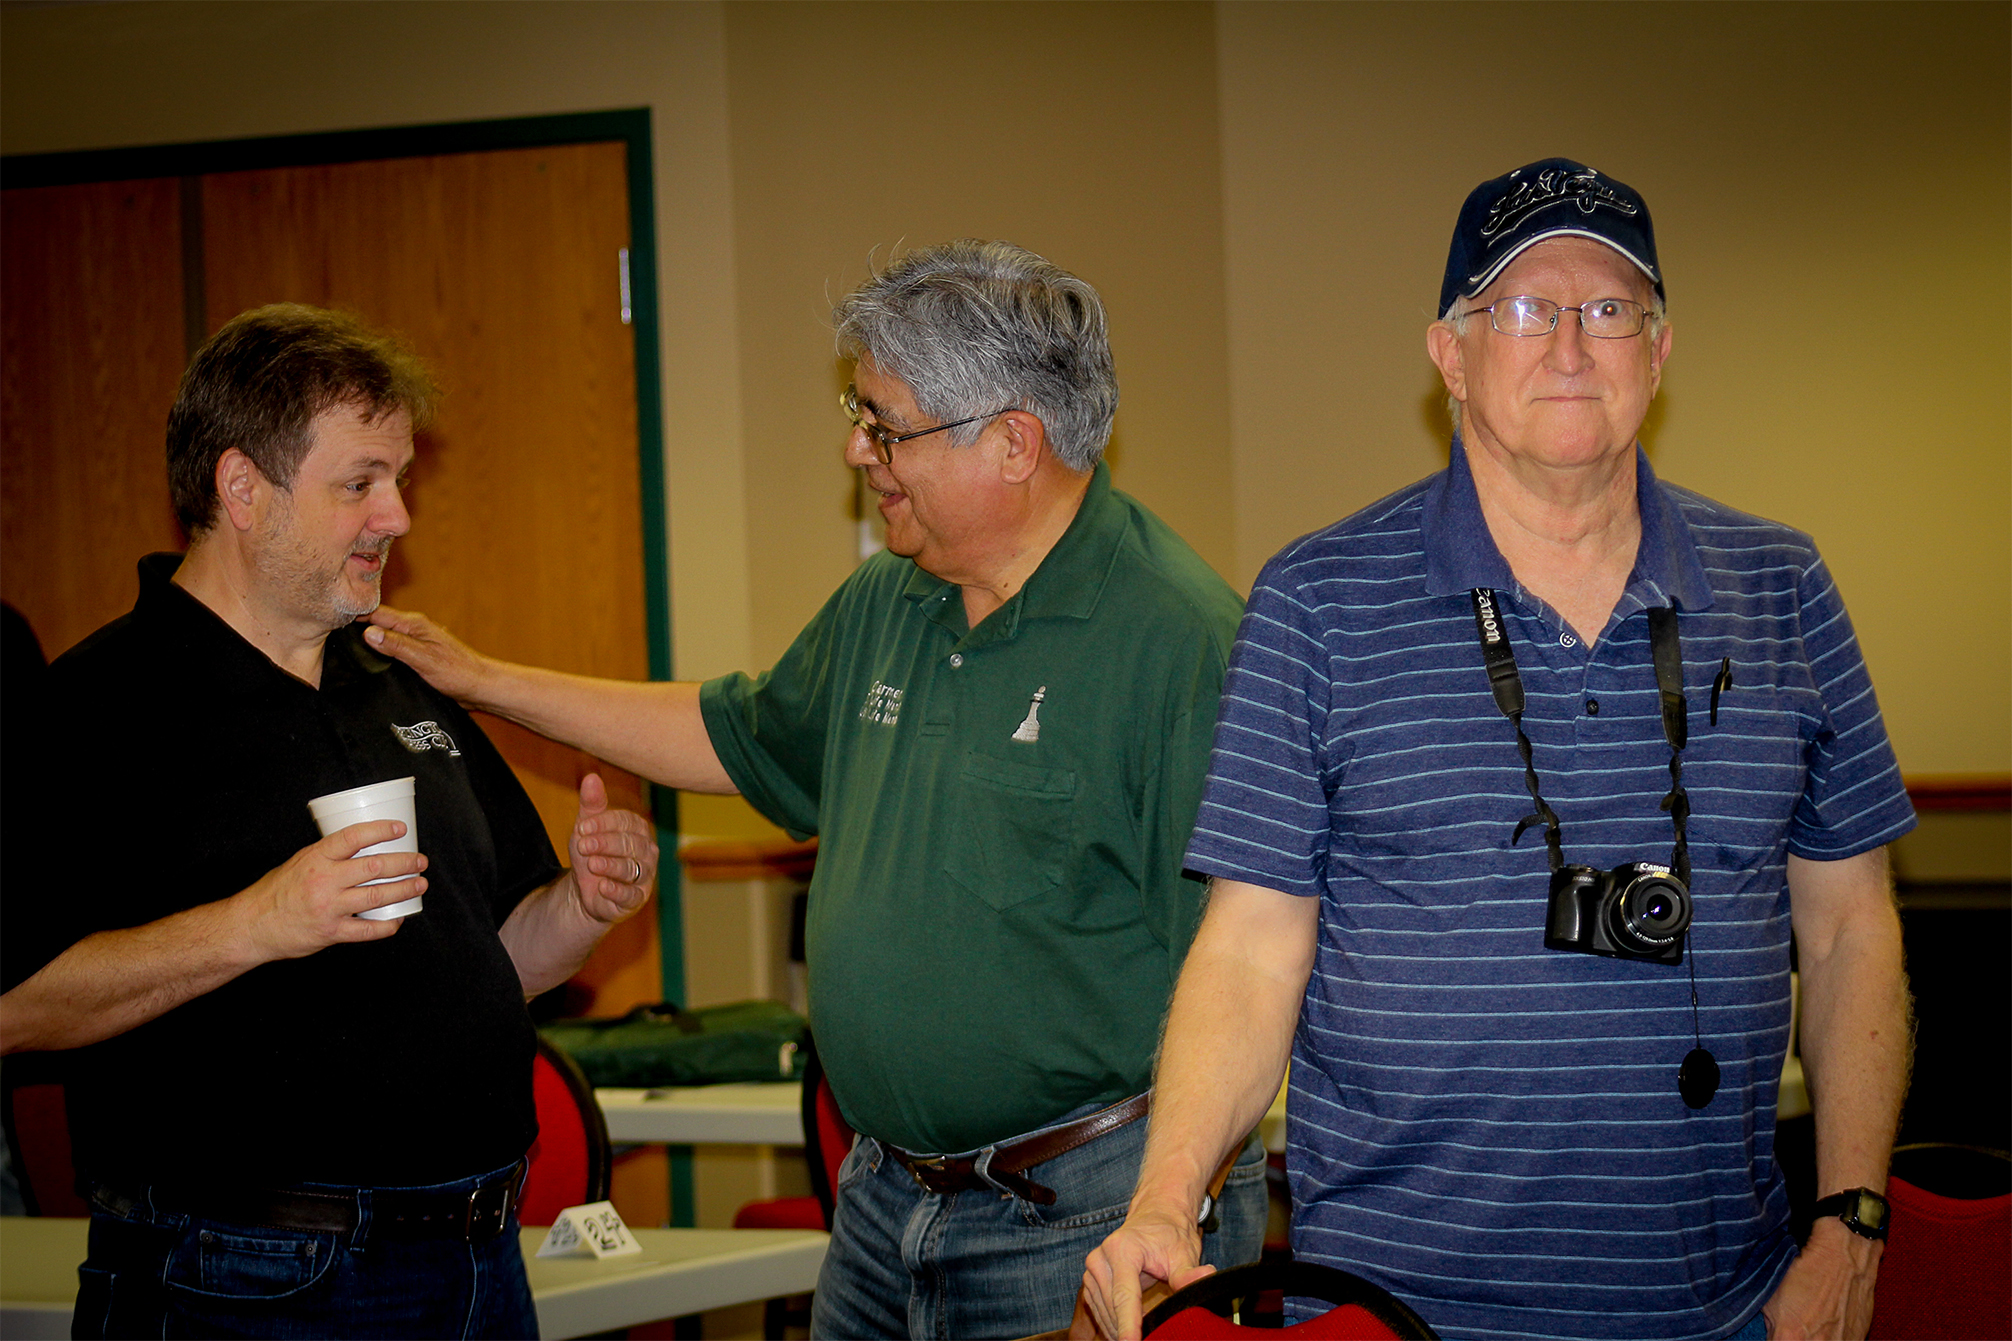 Texans Chris Wood (left) and Carmen Chairez (middle) relax and have fun telling RRSO stories.  Okie Mike Tubbs (right) seeks out another subject for his camera.  Photo by Sheryl McBroom.